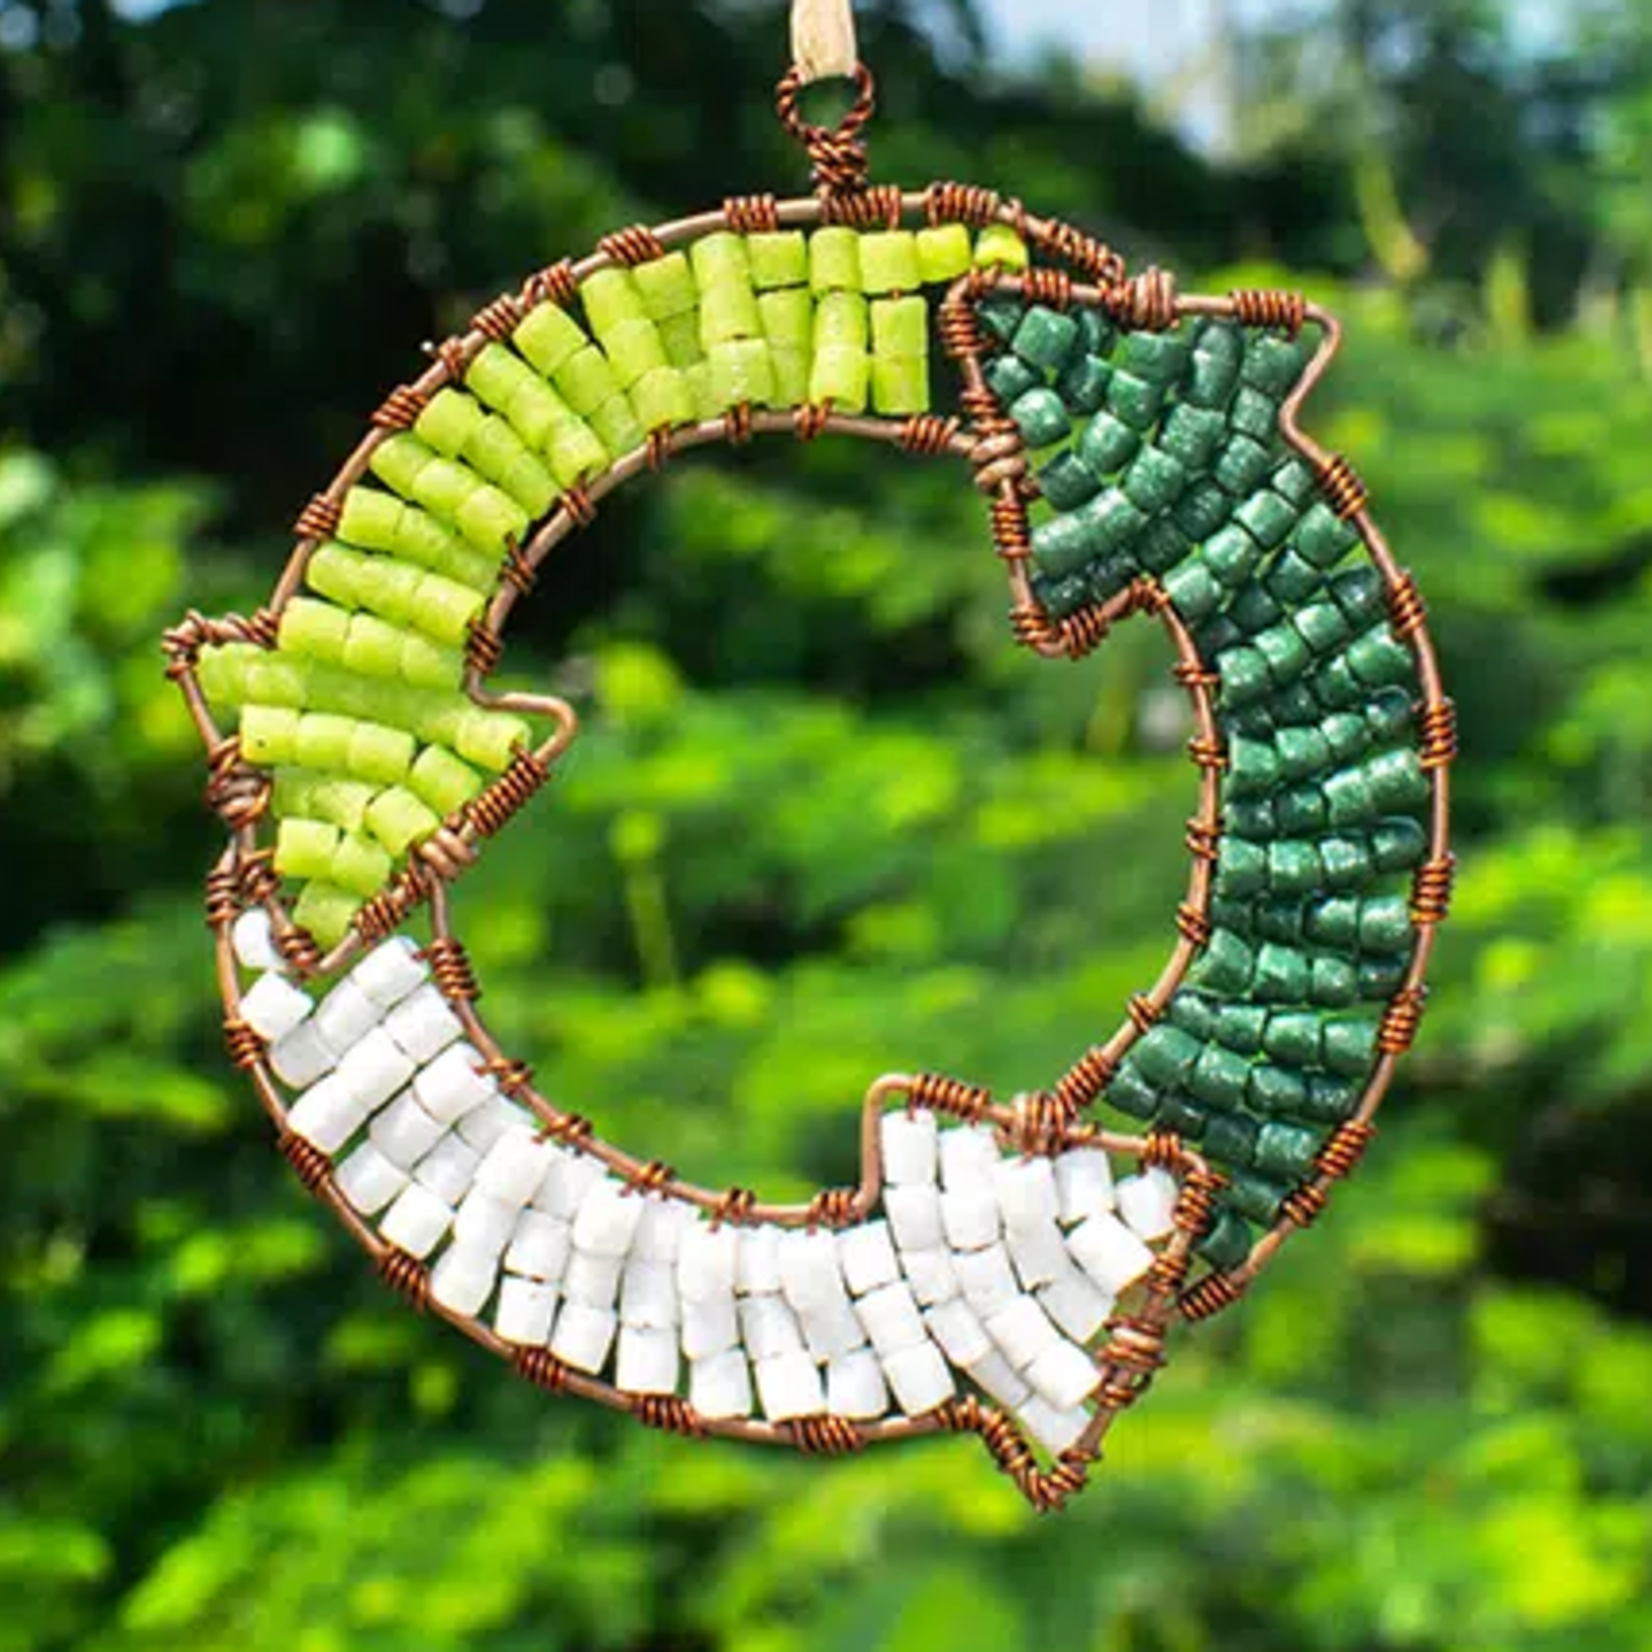 Global Mamas Global Mamas Recycled Glass Recycle Symbol Ornament